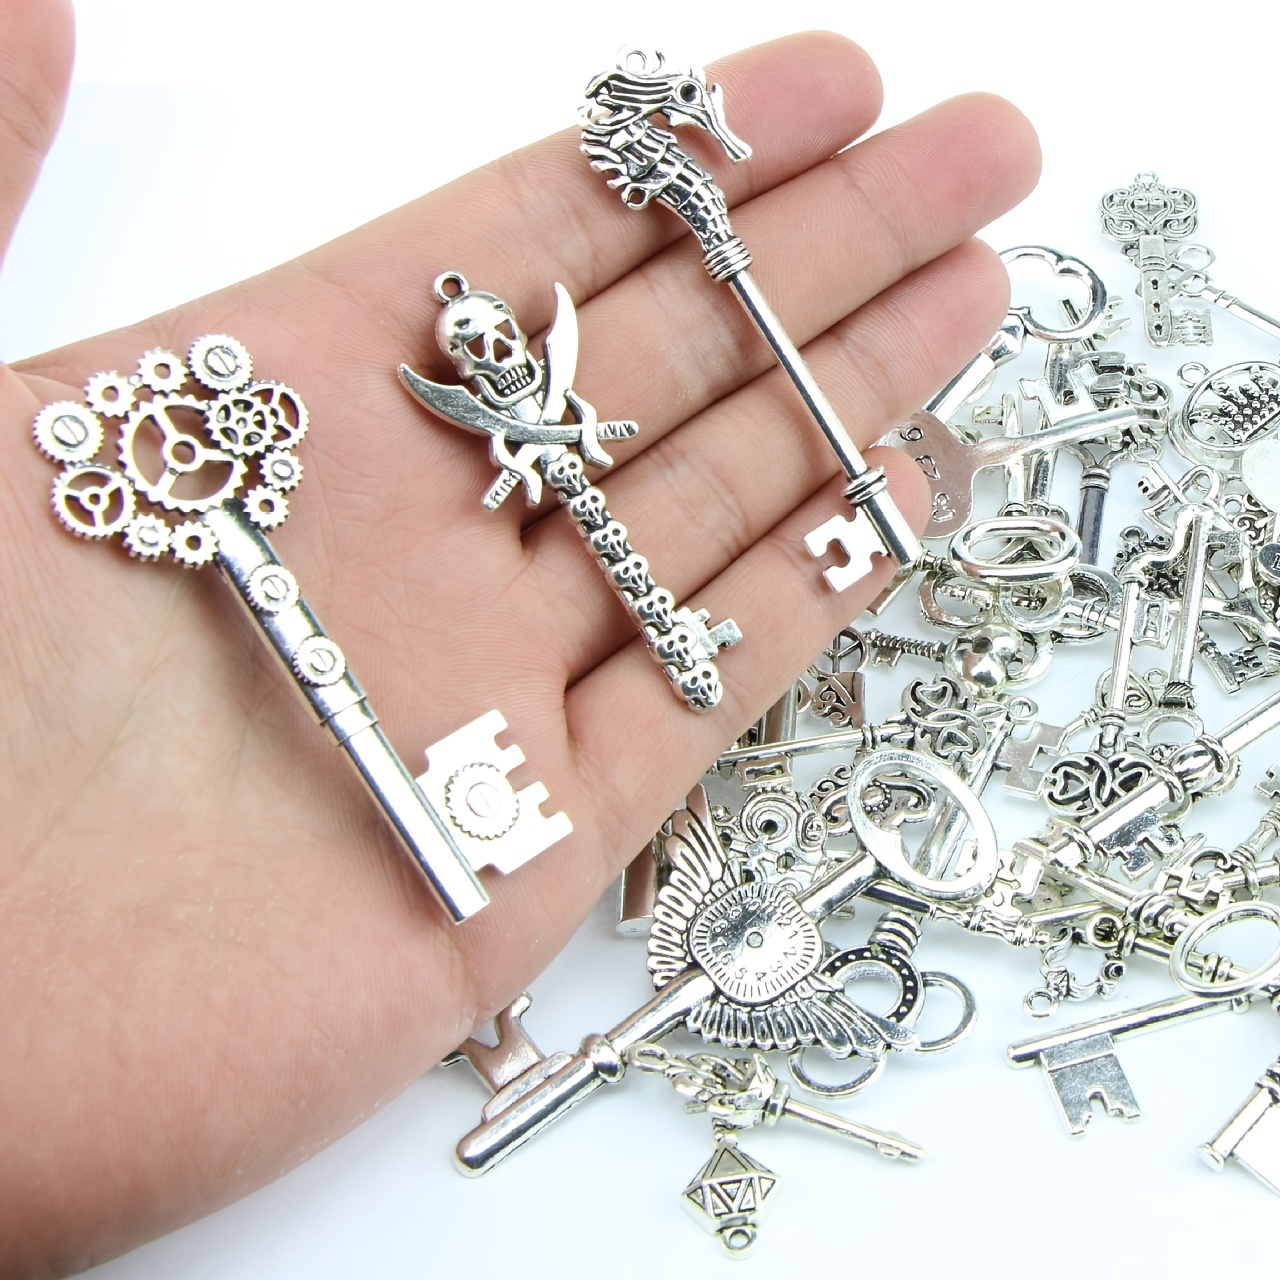 JIALEEY Silver Skeleton Keys Charms, 80pcs Wholesale Bulk Lots Mixed Antique Castle Dungeon Pirate Victorian Filigree Heart